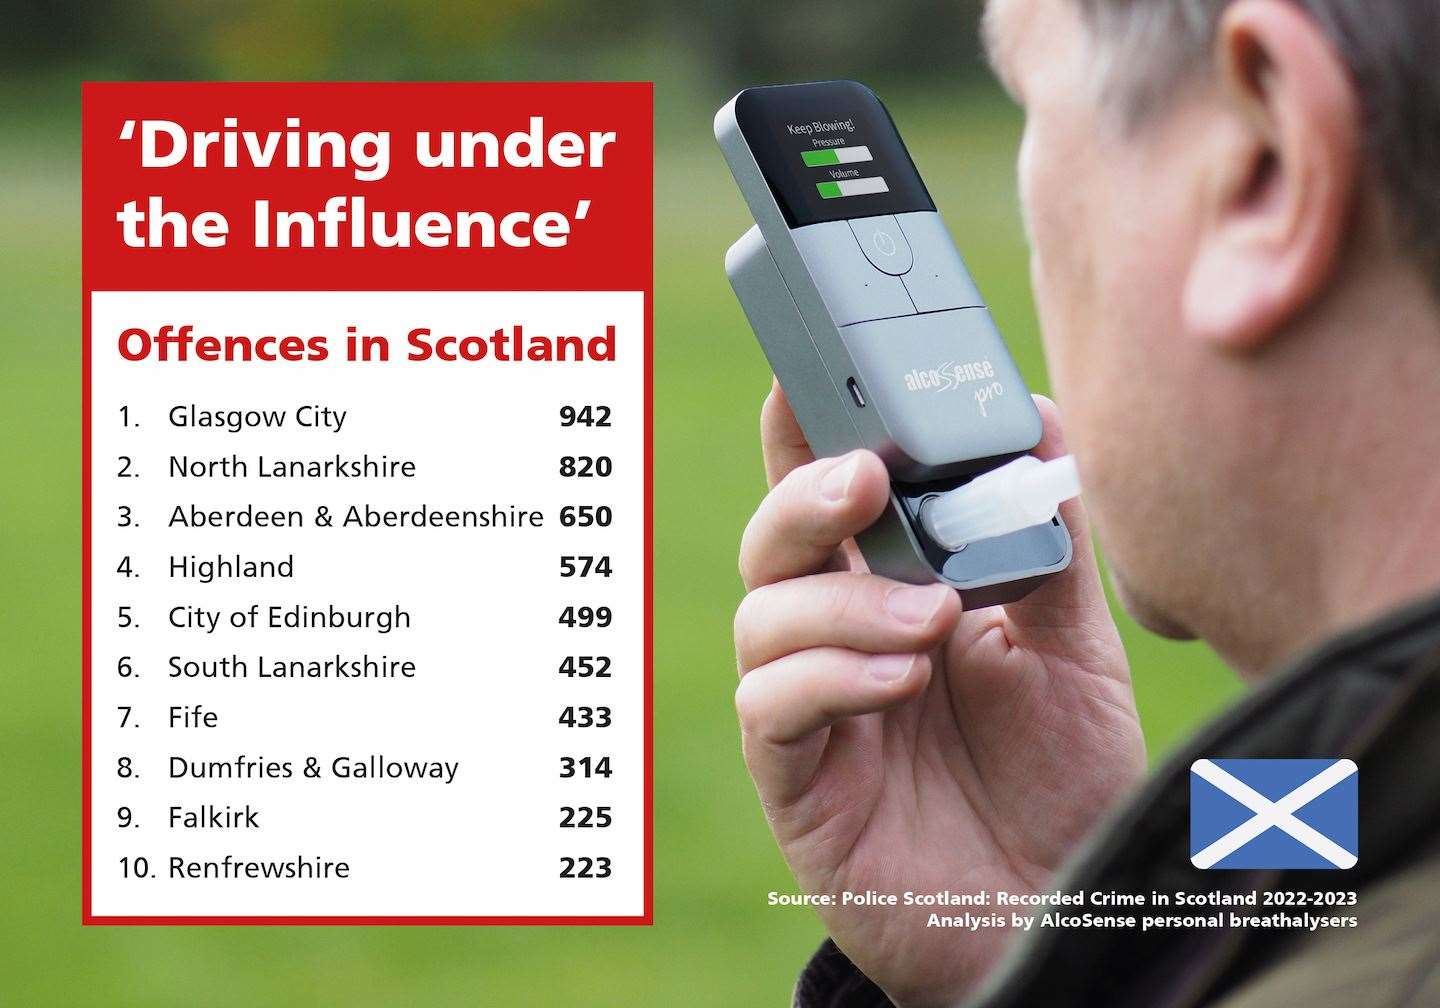 The worst hot-spots for drink-driving in Scotland.